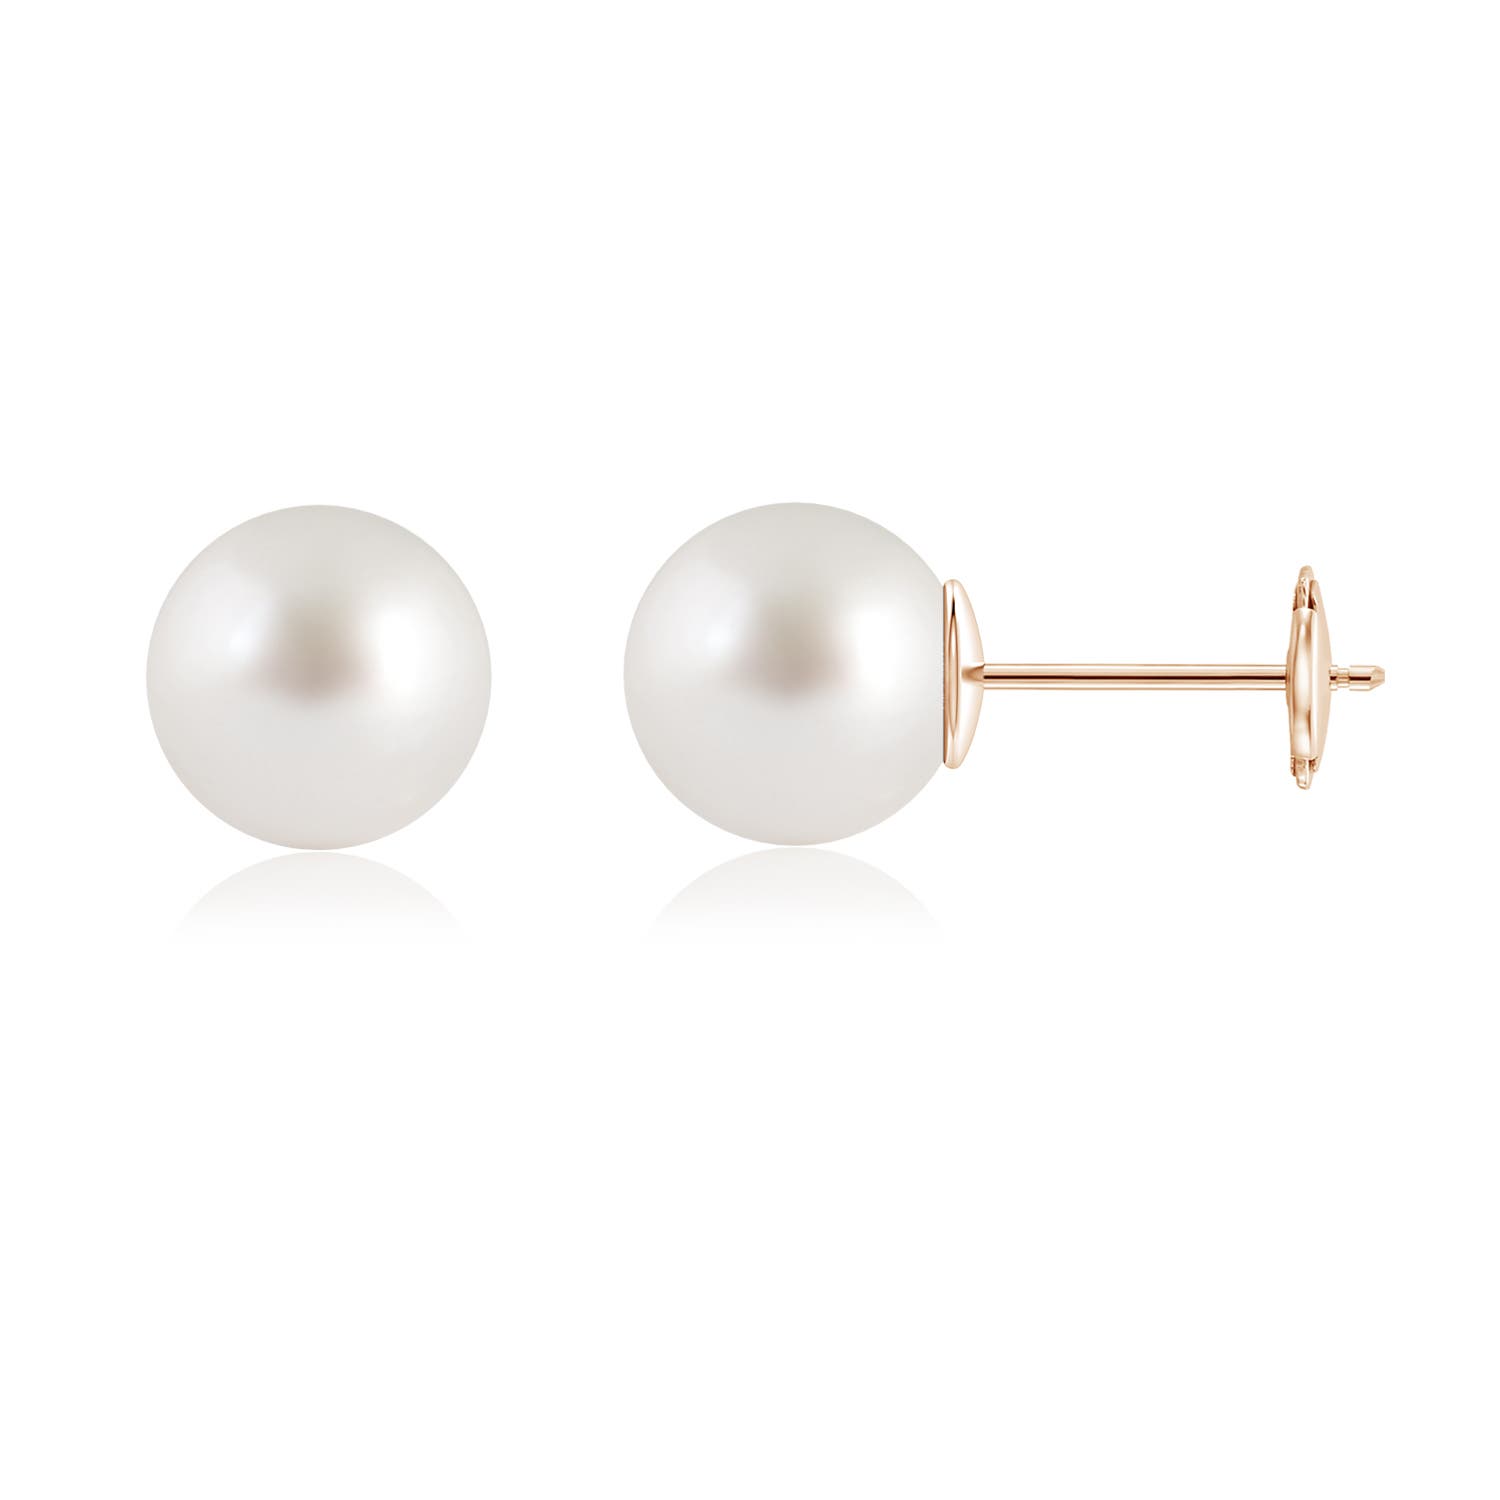 AAA - South Sea Cultured Pearl / 14.4 CT / 14 KT Rose Gold